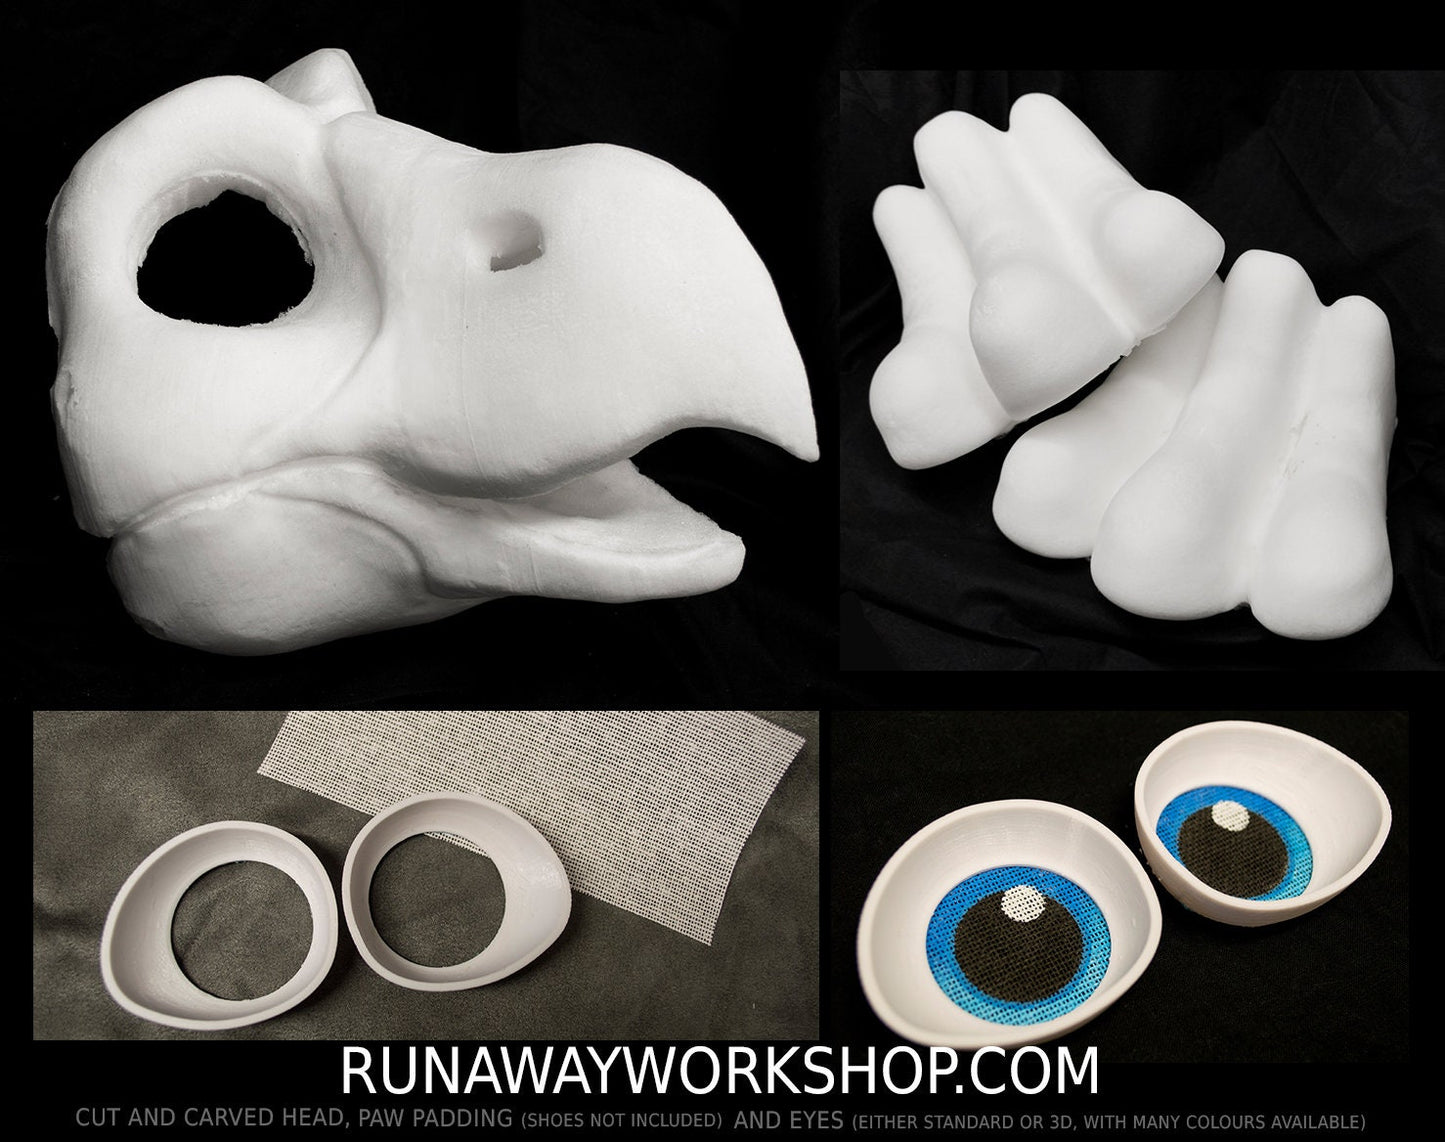 Large bird of prey bundle deal: cut and carved head base, Eyes and Feet padding, for costumes mascots and fursuits.